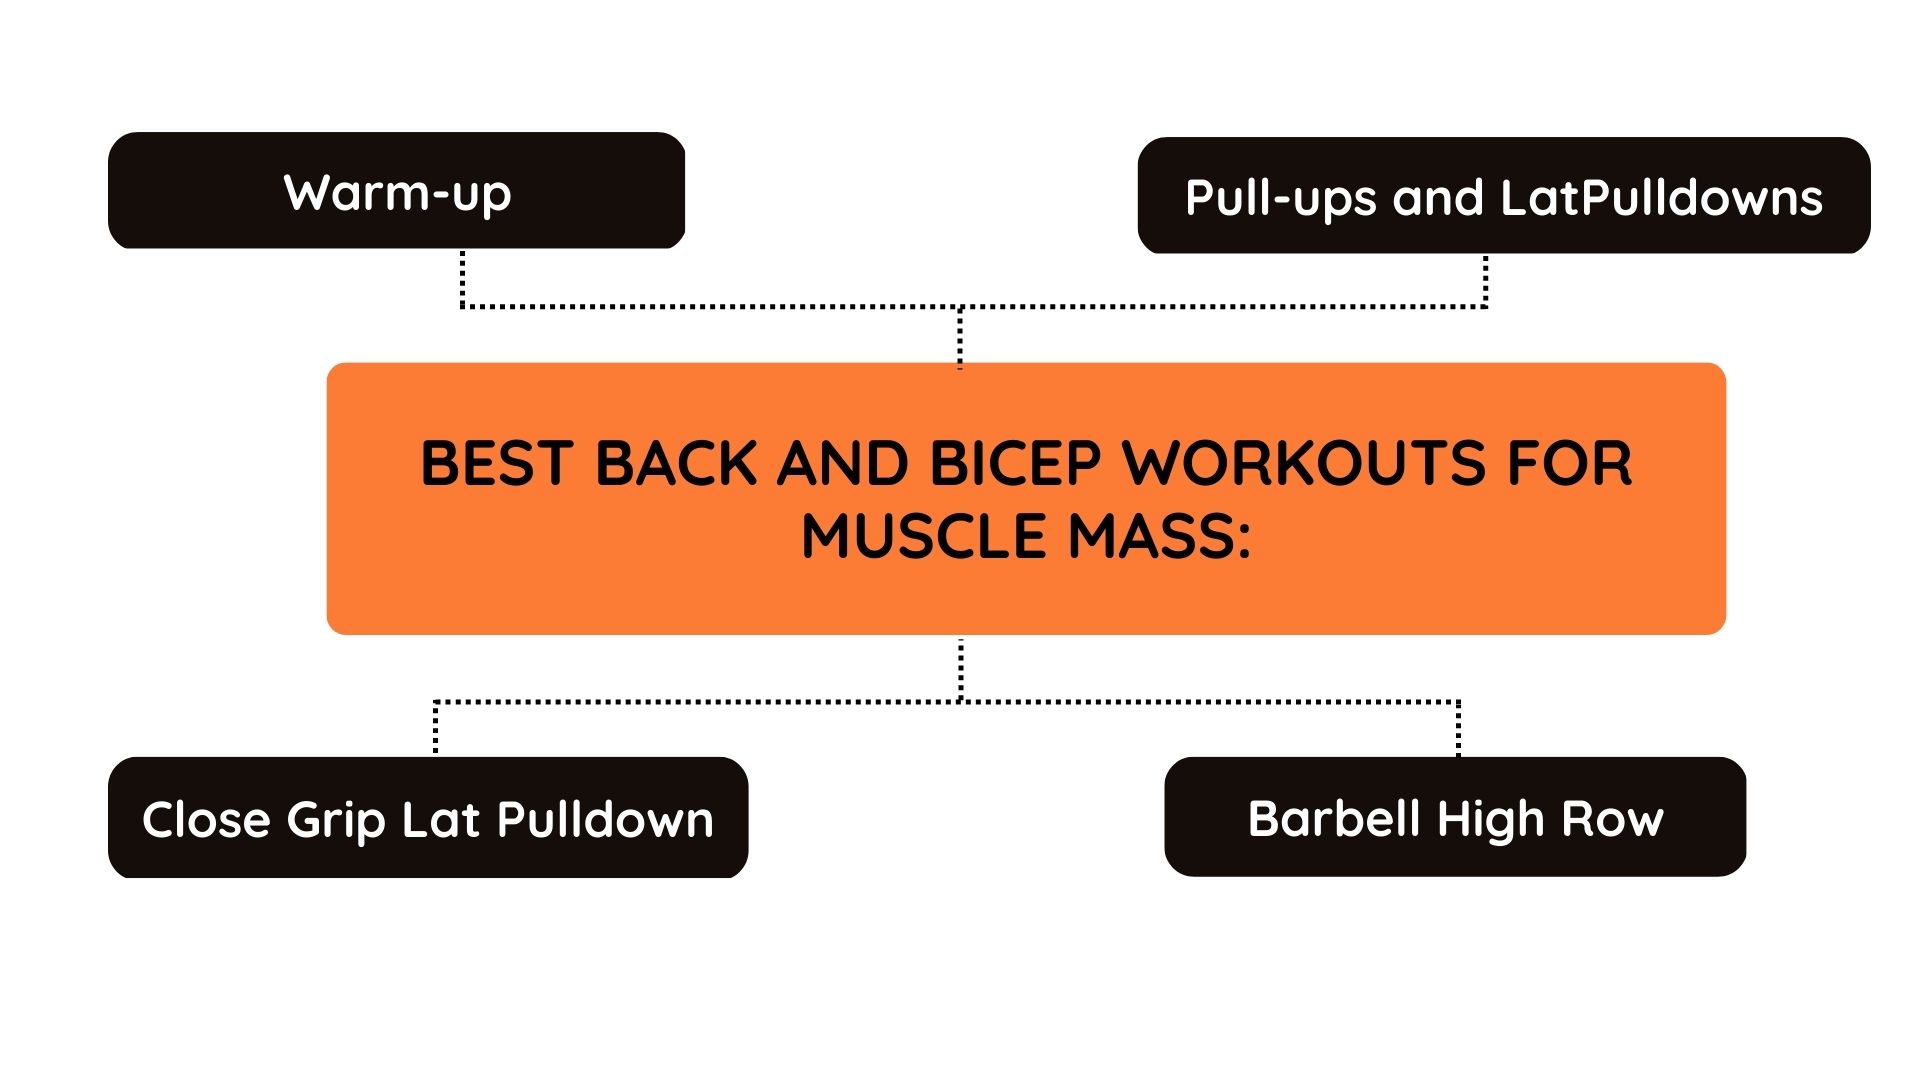 Best Back and Bicep Workouts For Muscle Mass